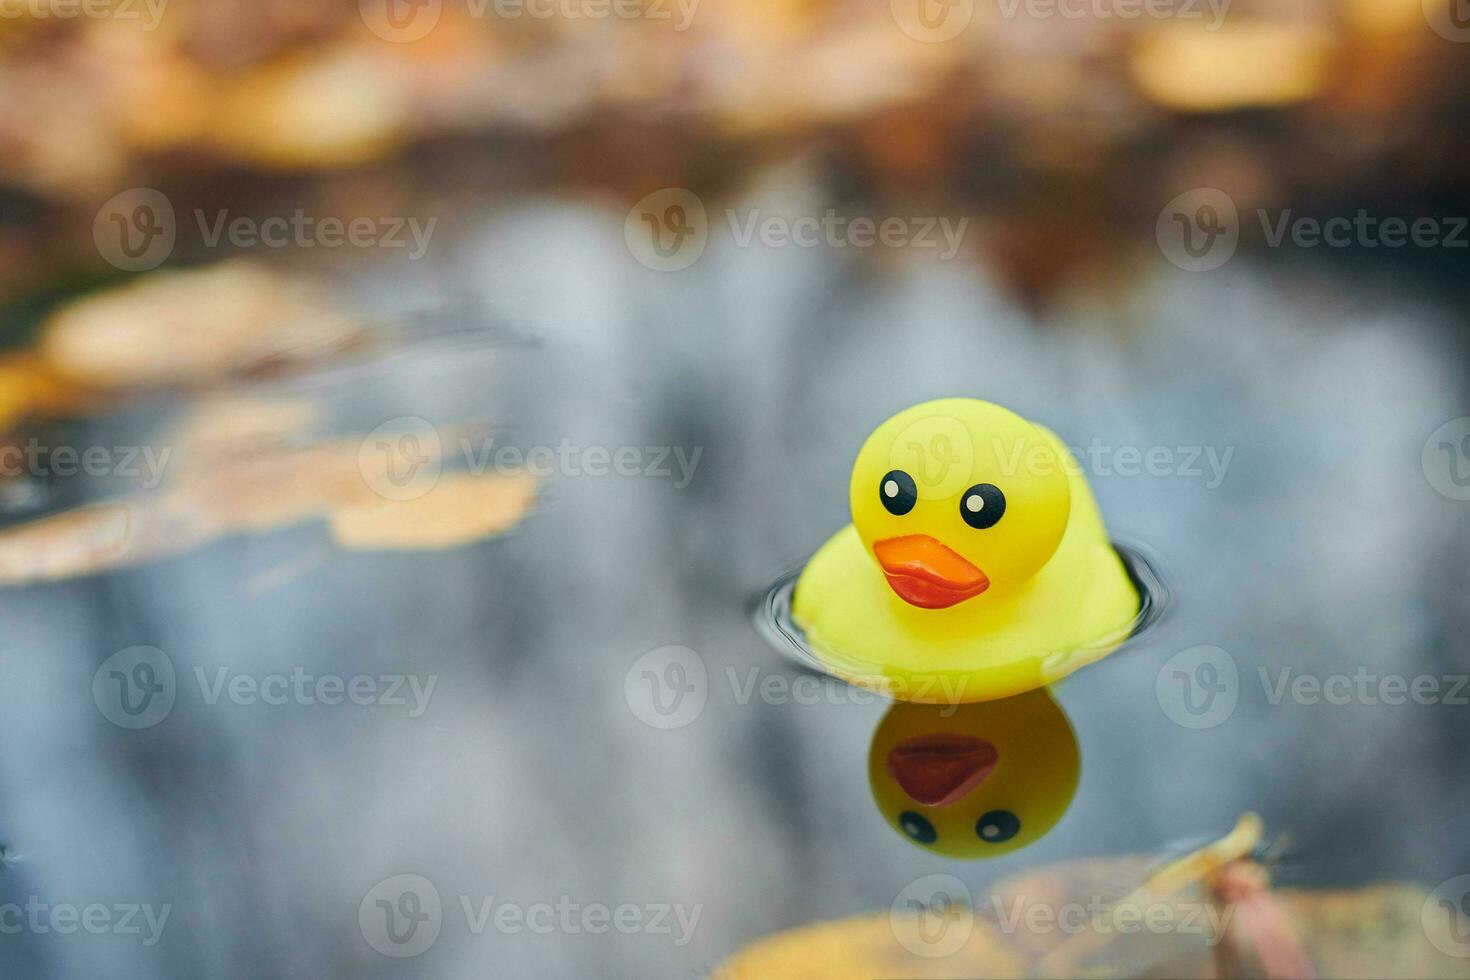 Autumn duck toy in puddle with leaves photo